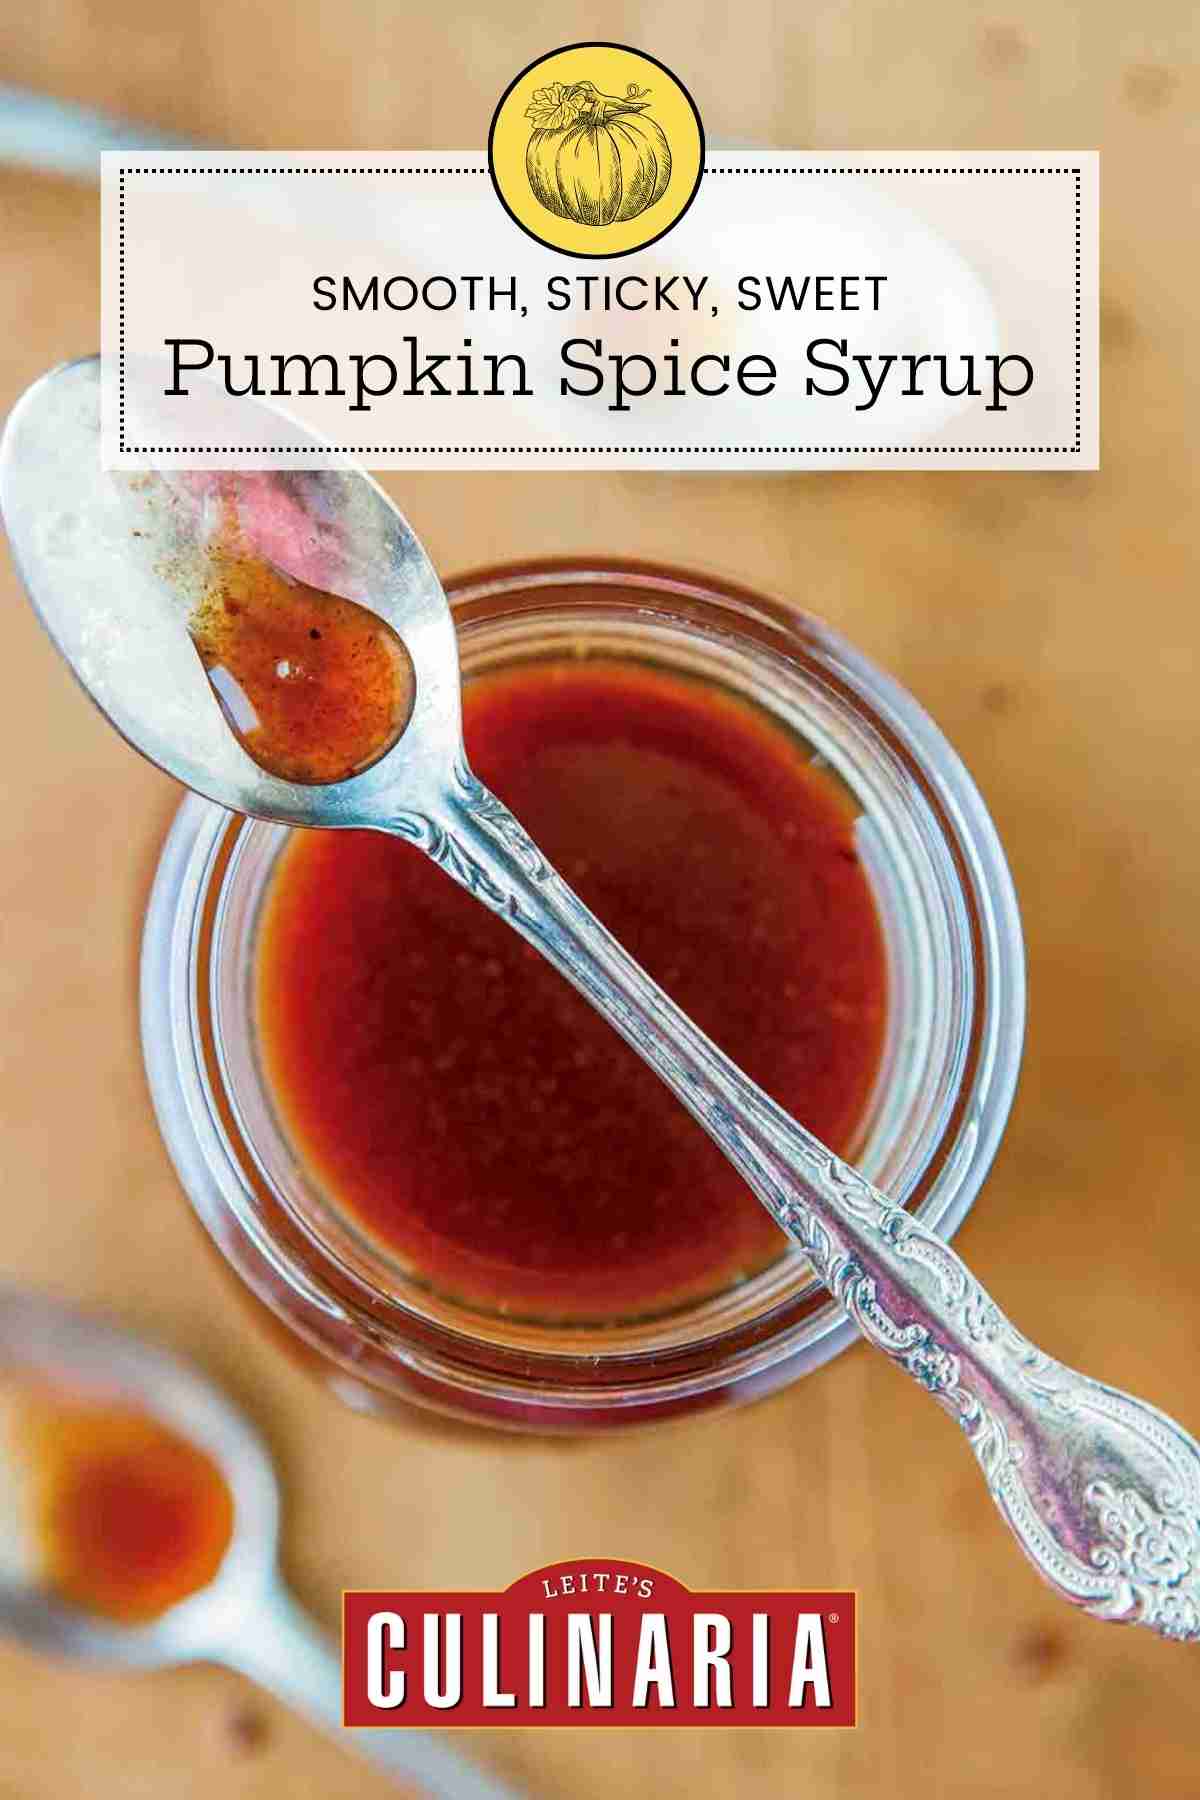 A jar of pumpkin spice syrup with a spoon resting on top and two spoons beside the jar.